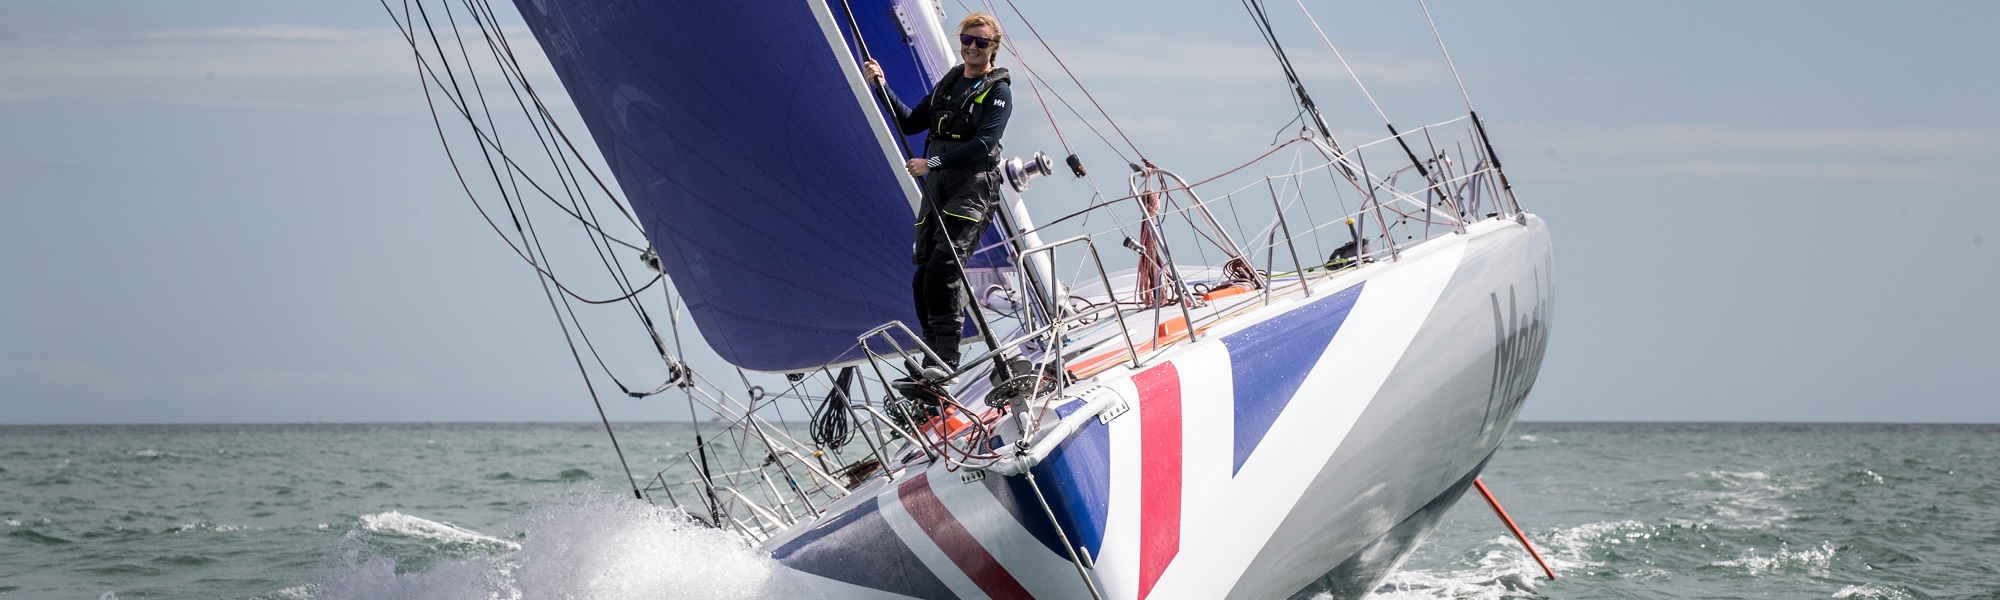 The Vendée Globe 2020: 7 Lessons From The World’s Toughest Sailing Race